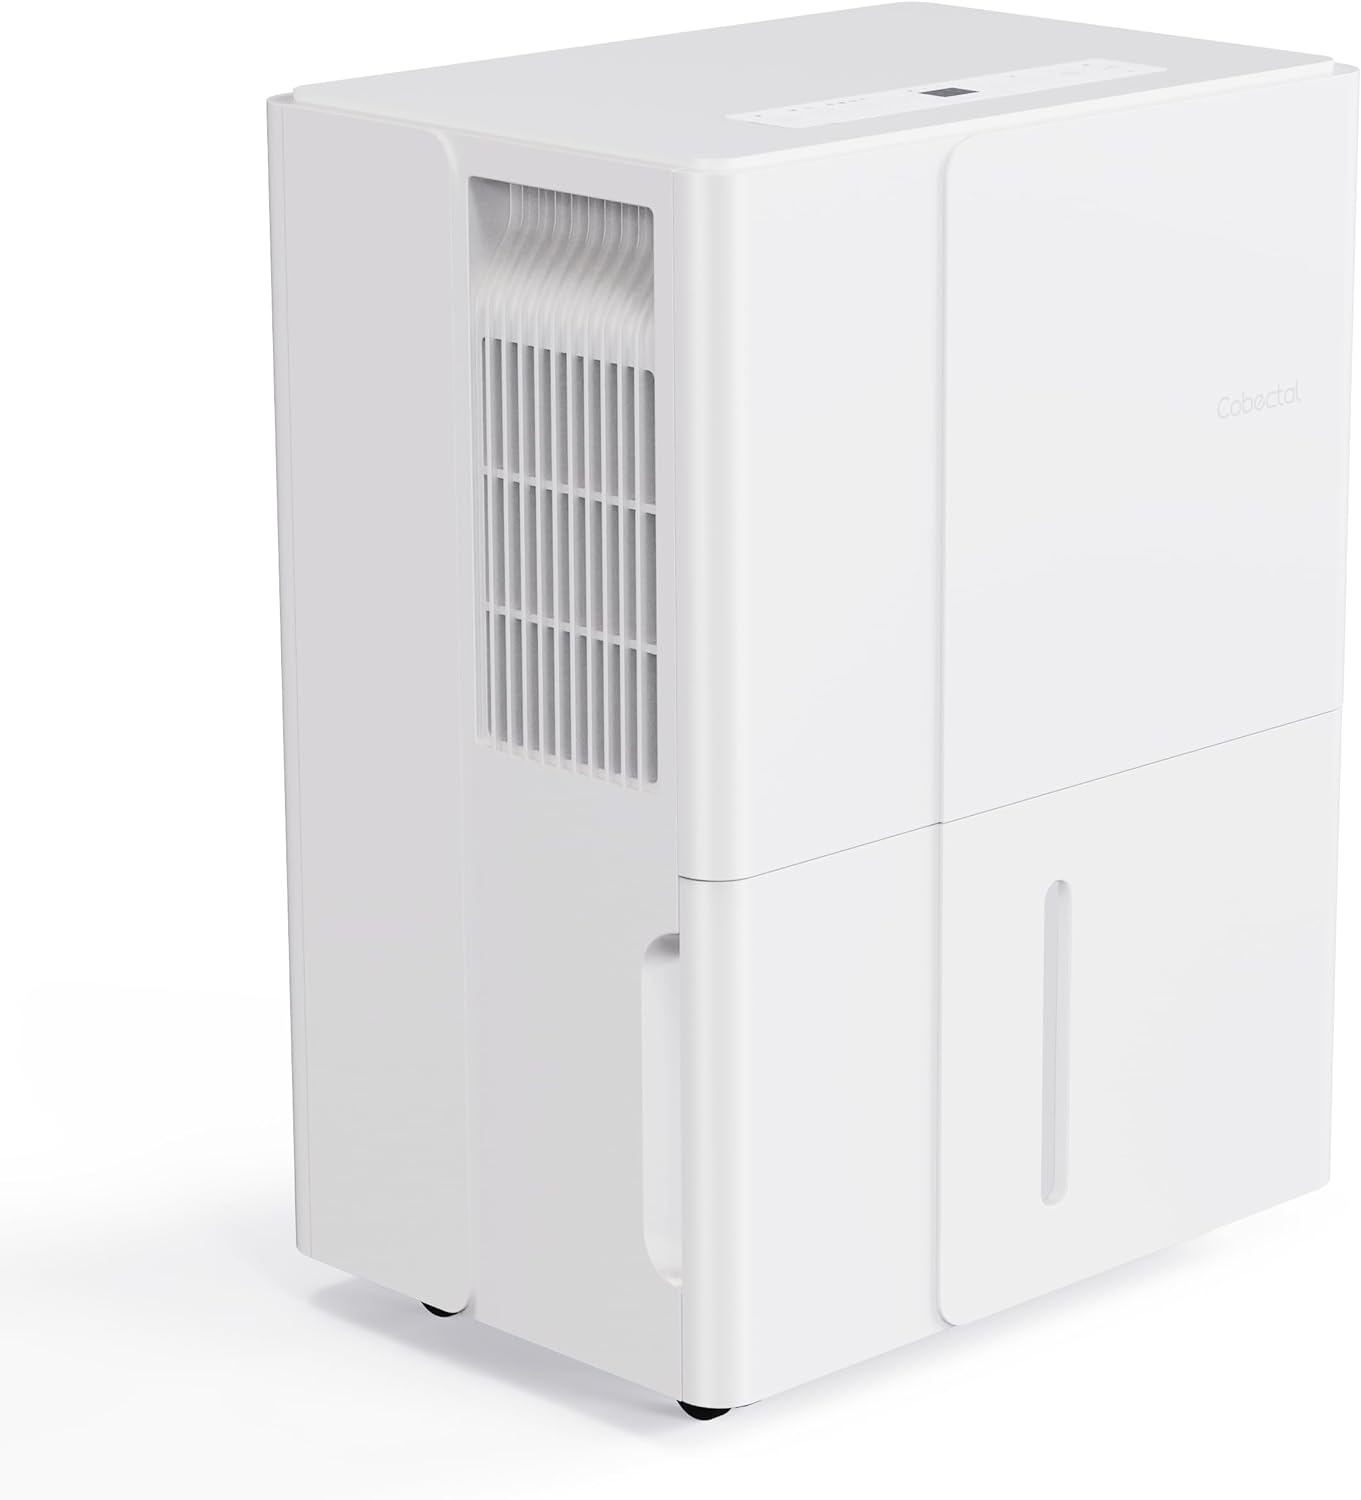 Cobectal Pint Dehumidifier for Home, Basement and Large Rooms up to 1500 Sq. Ft